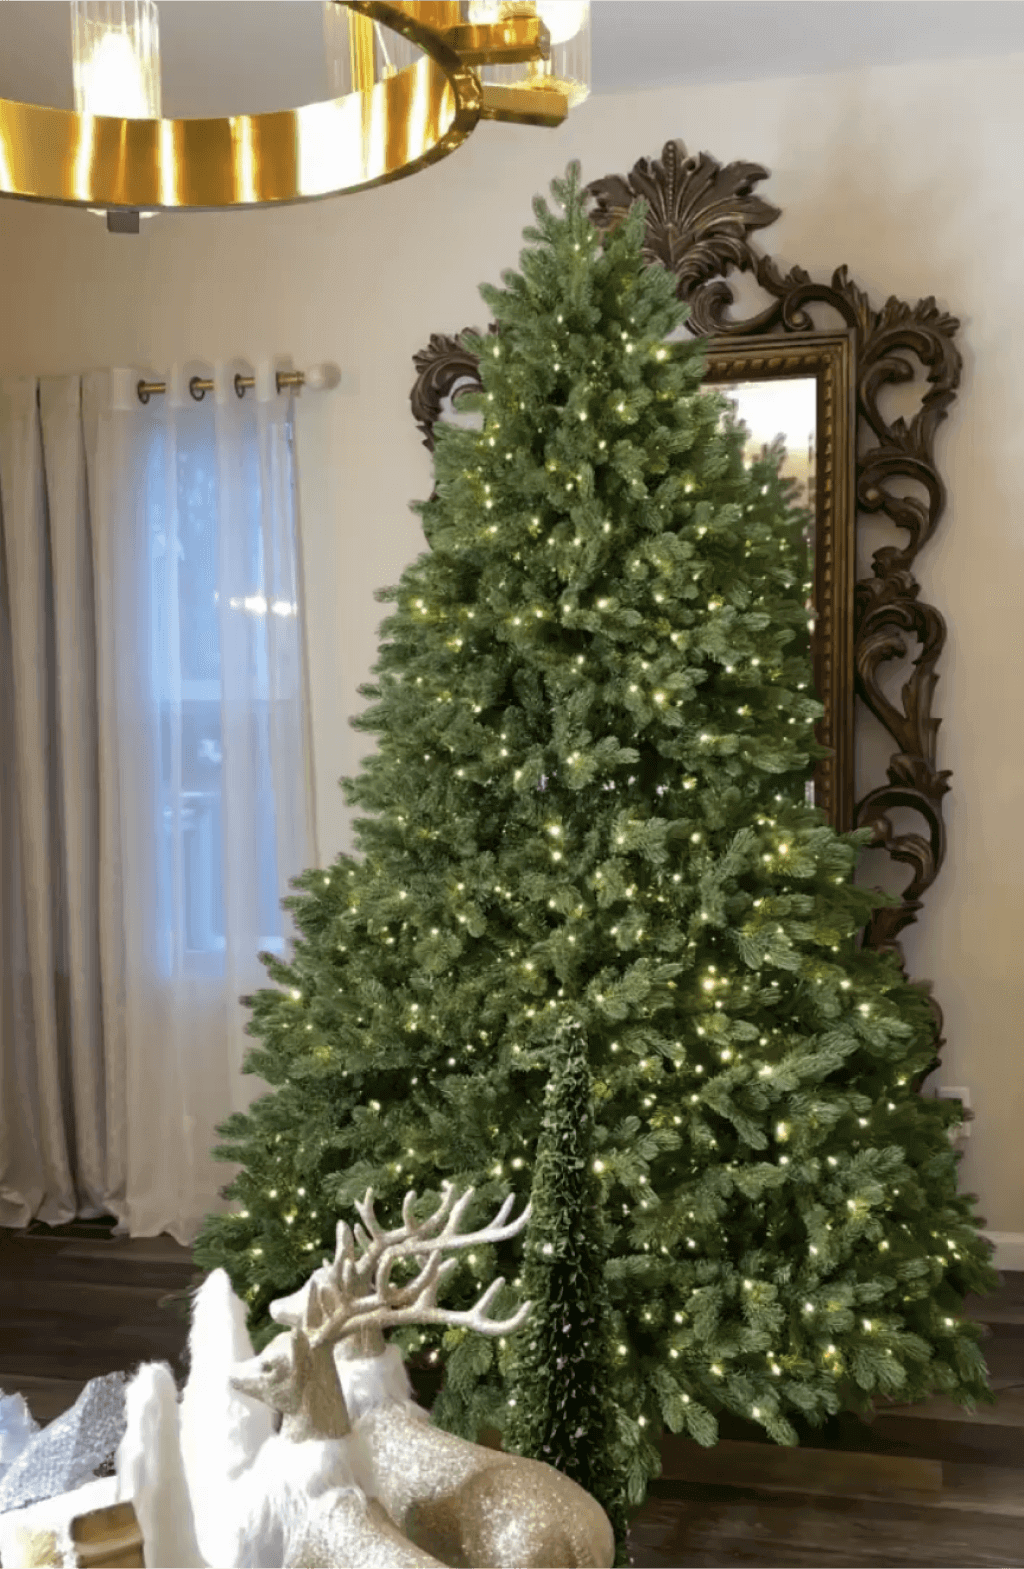 King of Christmas 6.5' Cypress Spruce Artificial Christmas Tree with 1000 Warm White & Multi-Color LED Lights